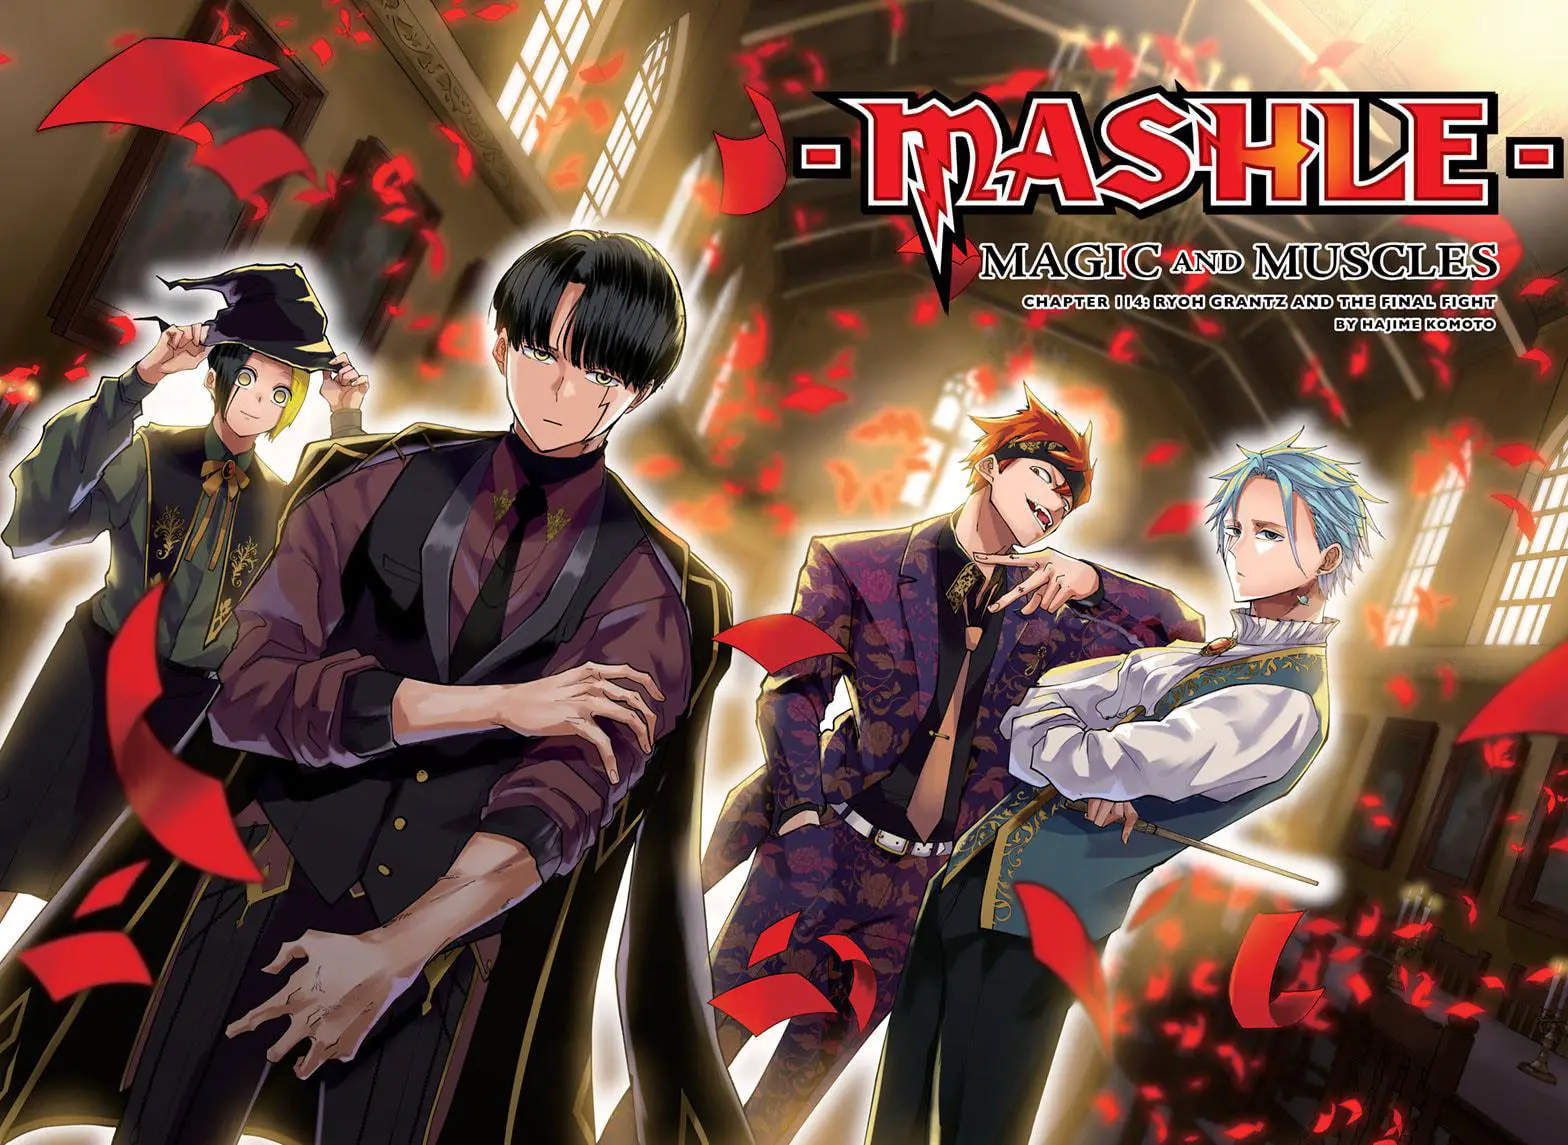 MASHLE: MAGIC AND MUSCLES Season 2 Officially Announced for